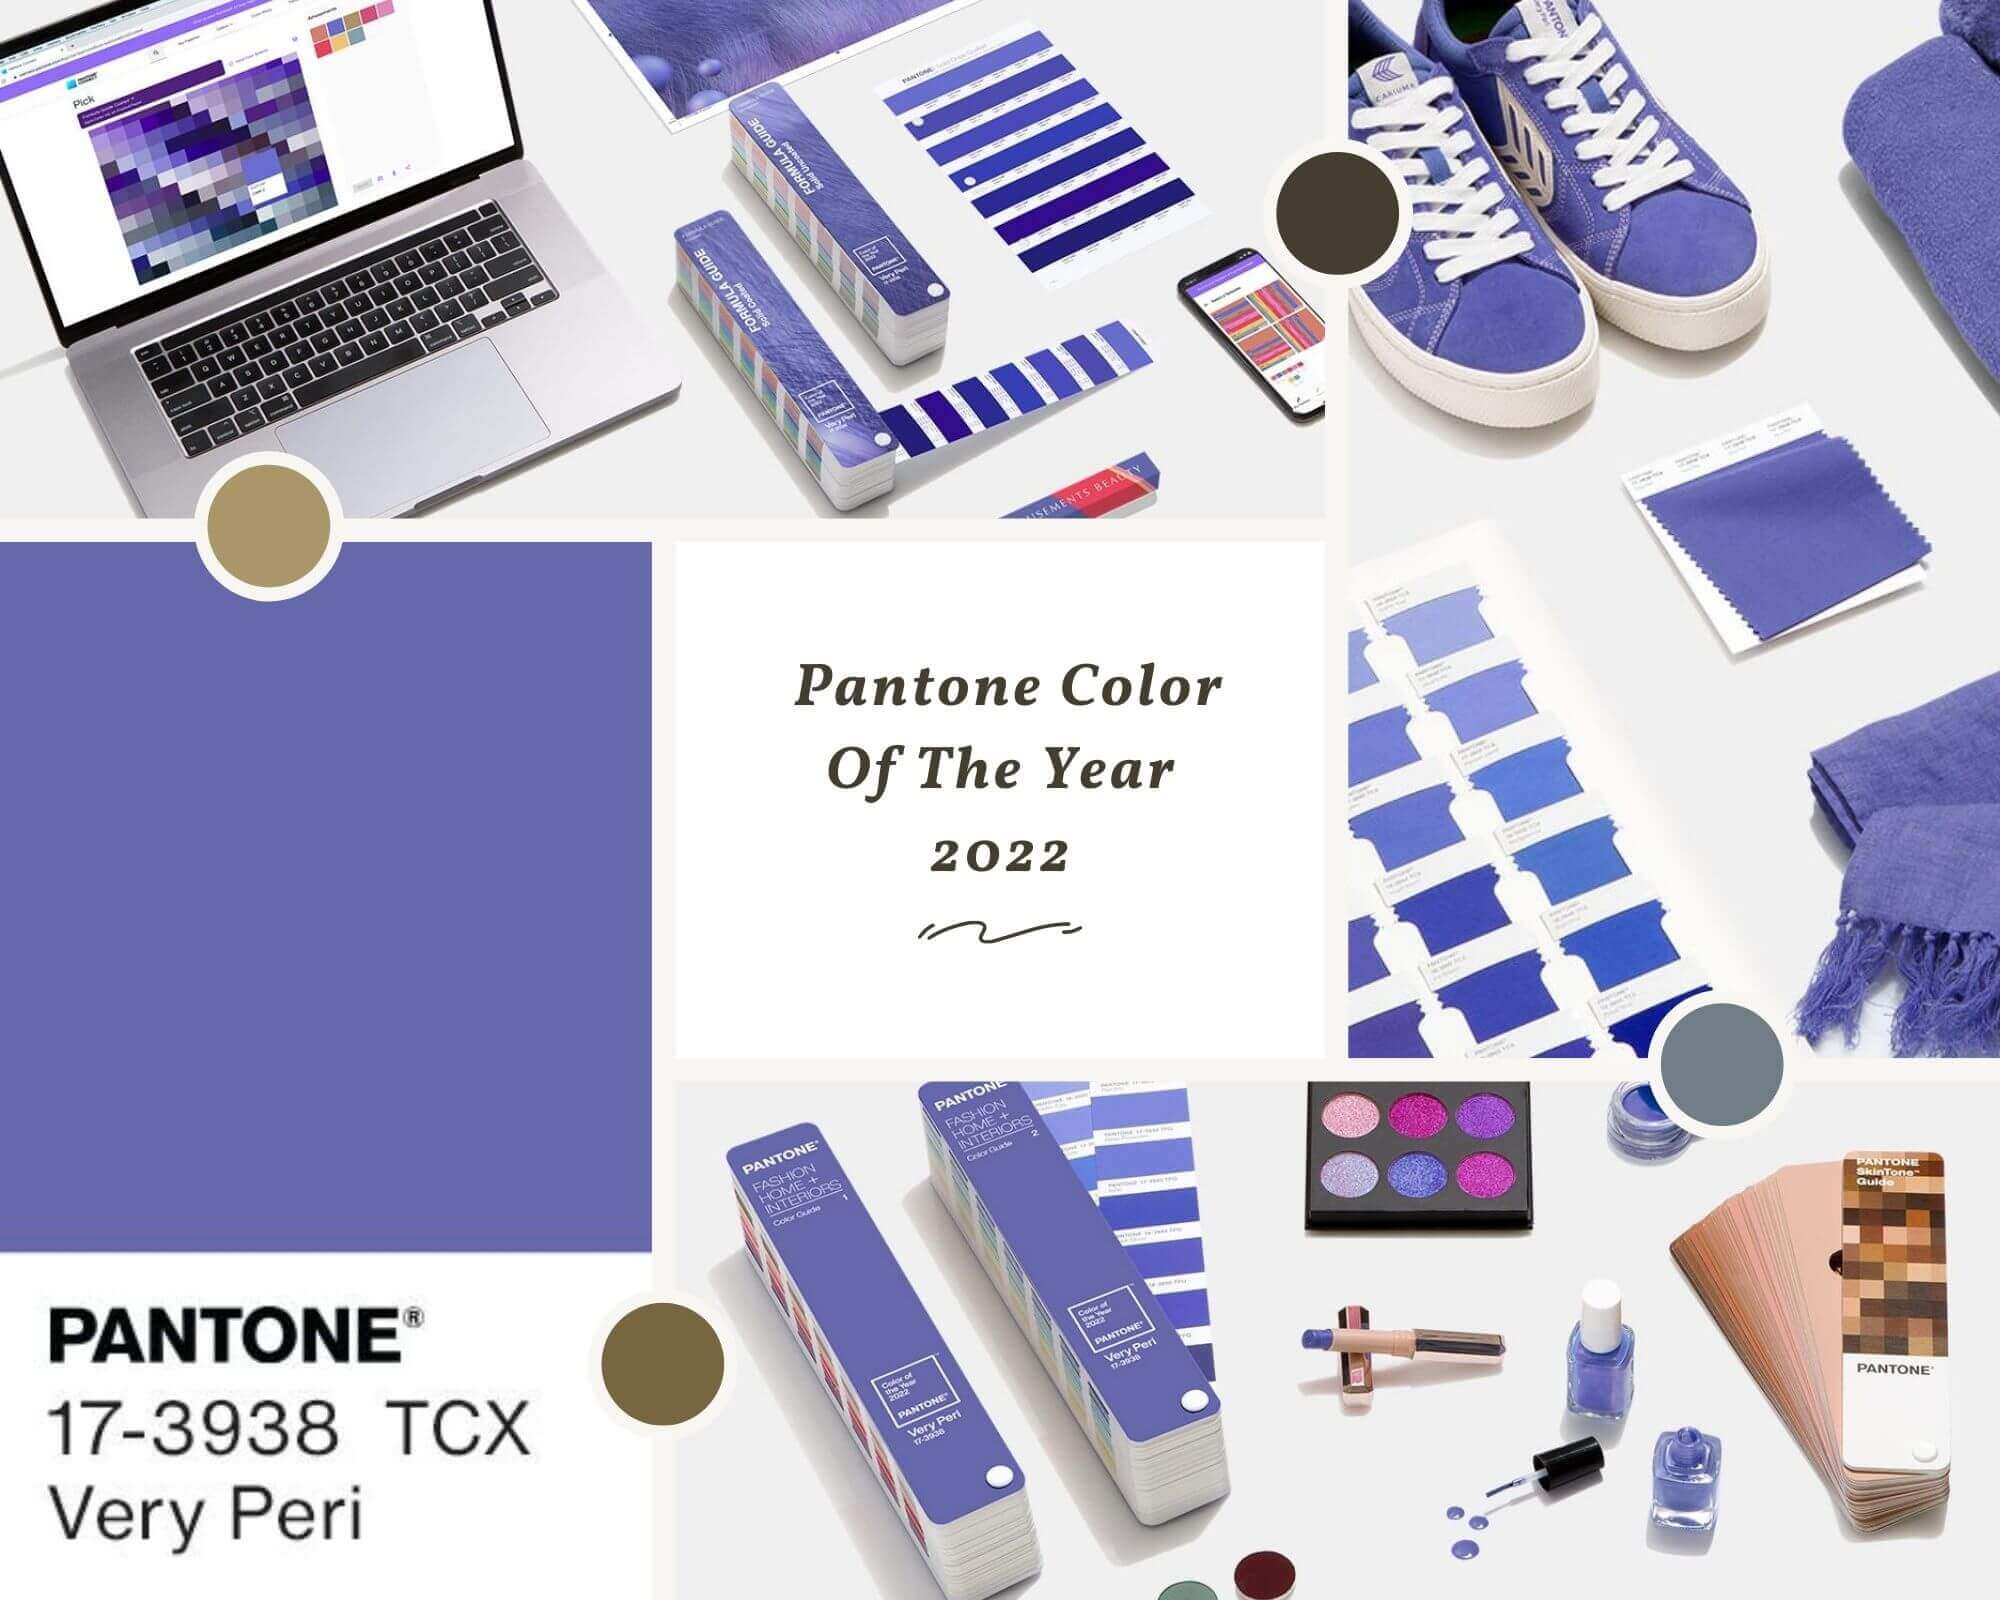 Design-With-Pantone-Color-Of-The-Year-2022